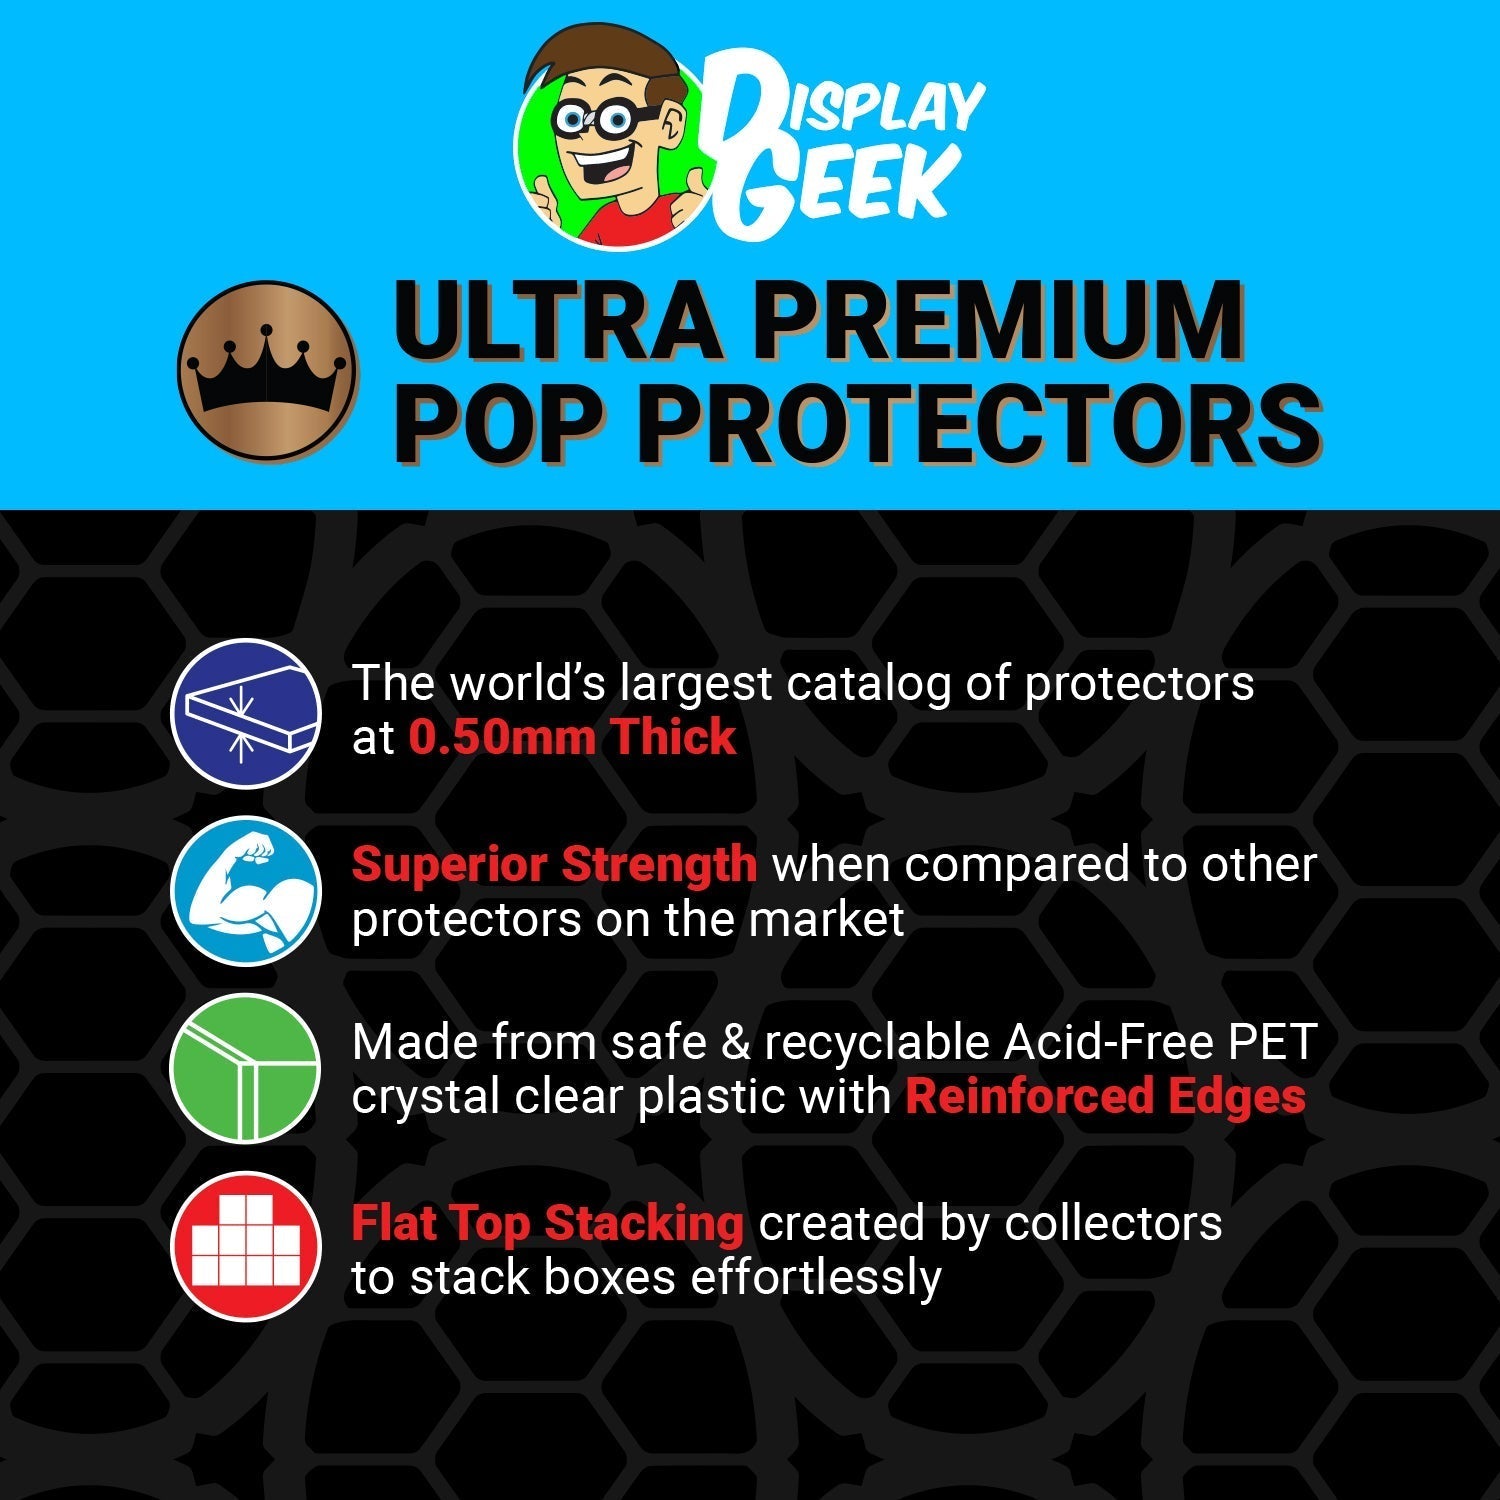 Pop Protector for Bigfoot Funko Pop Pez - PPG Pop Protector Guide Search Created by Display Geek